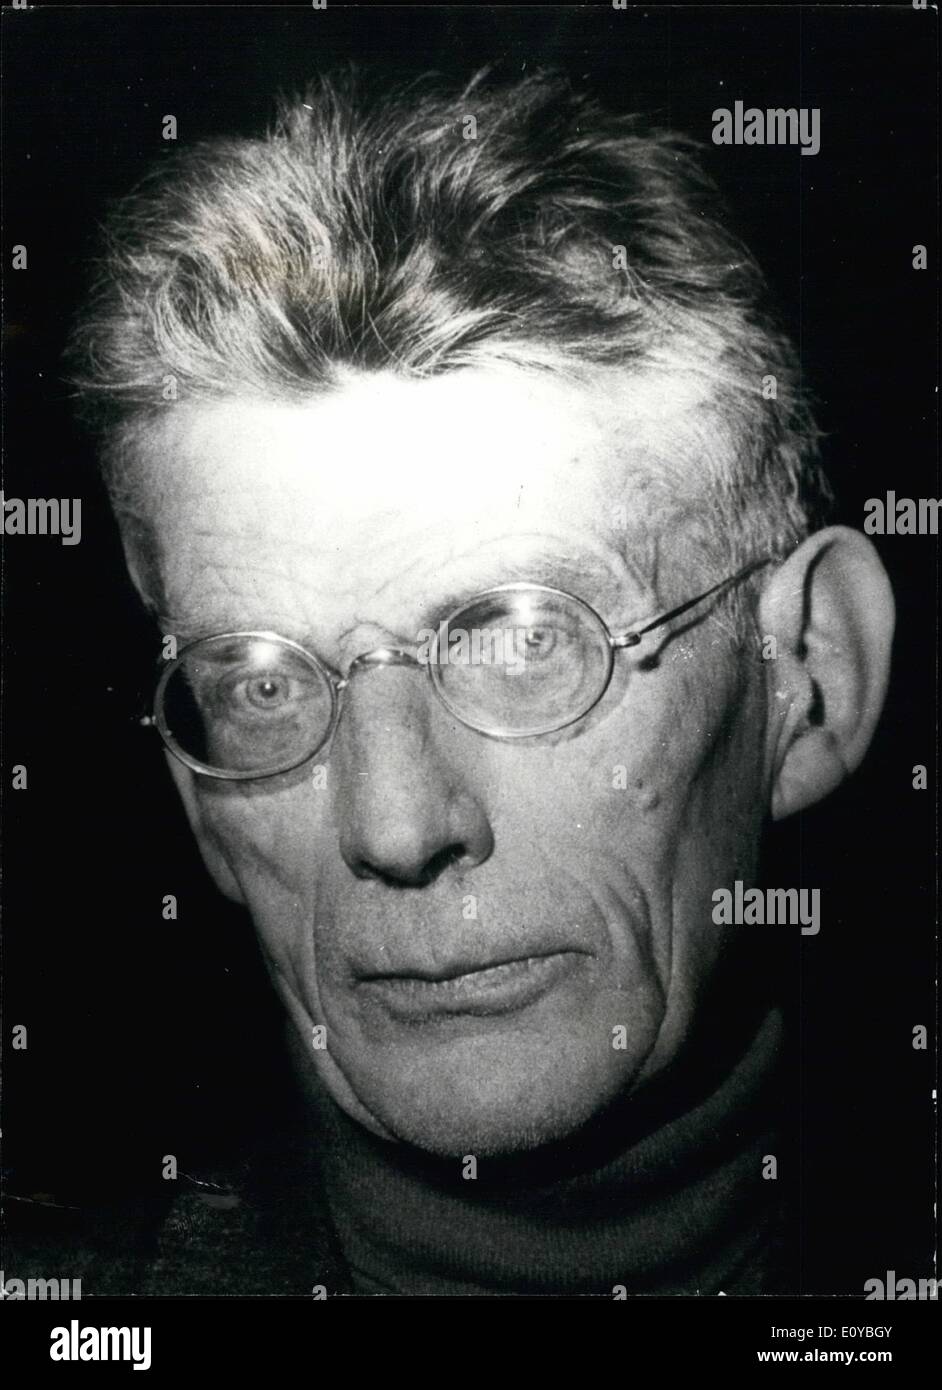 Oct. 10, 1969 - Samuel Beckett wins nobel prize.: Samuel Beckett, the Irish-born playwright, was yesterday awarded the 1969 Nobel Prize for Literatures. The  year old writer has lived in Paris since 1937. Photo shows Samel Beckett who has been awarded the 1969 Nobel prize n Literature. Stock Photo